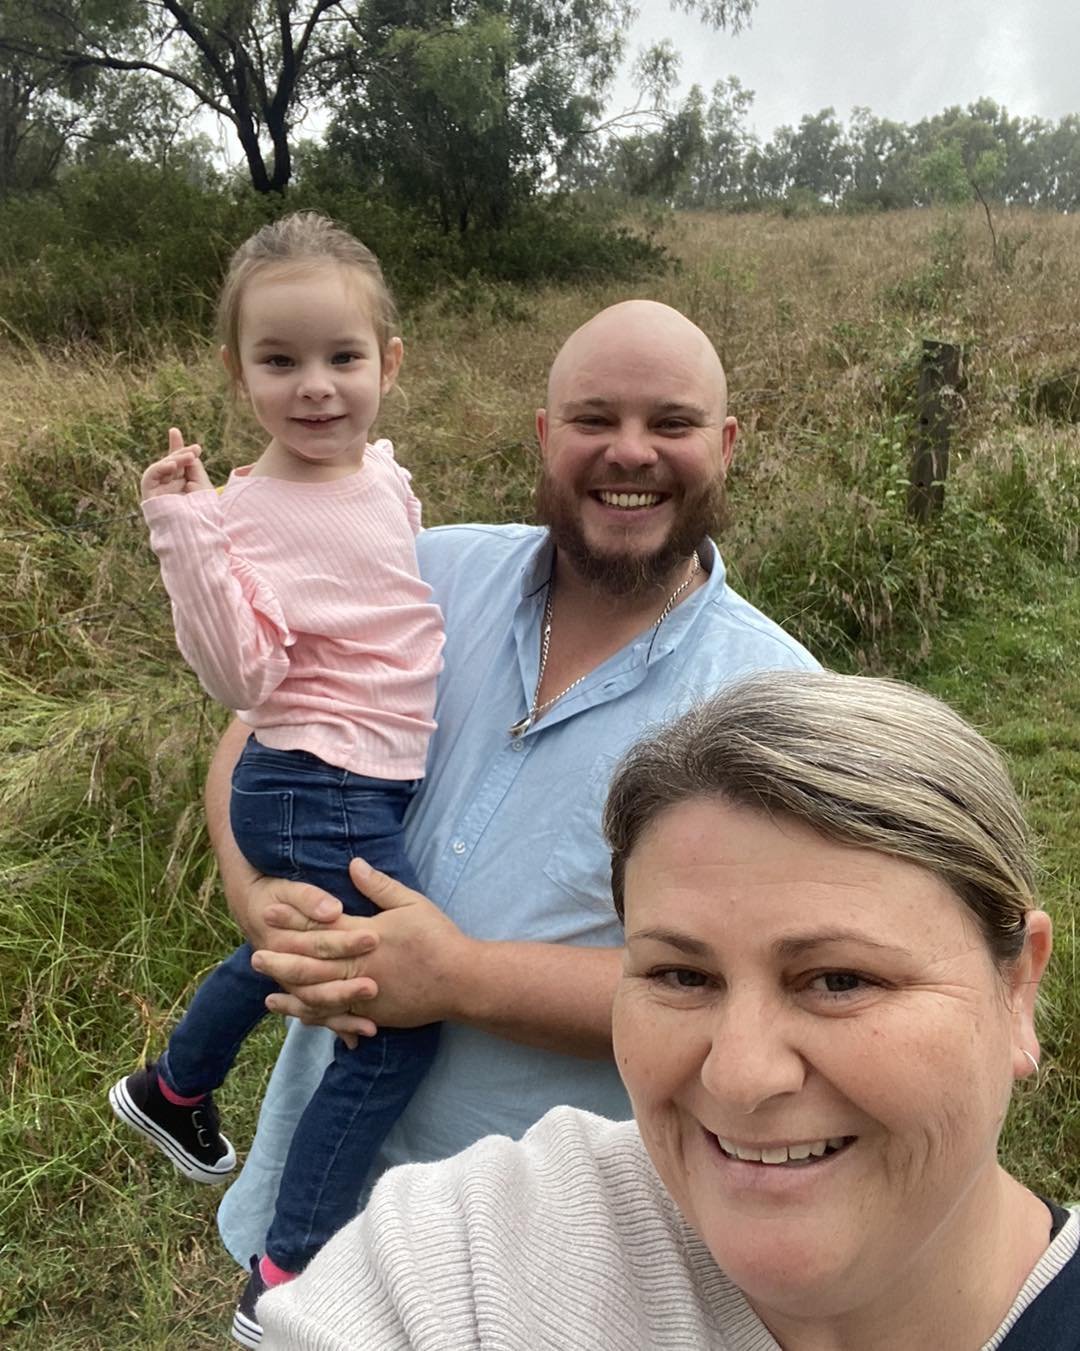 Jake drove all the way from Sydney for a special portrait session with his daughter Oaklyn! Yep you read that right 😜
So when the day started with rain we were quite disappointed but hopeful the sun would appear in time for our session. 
Unfortunate